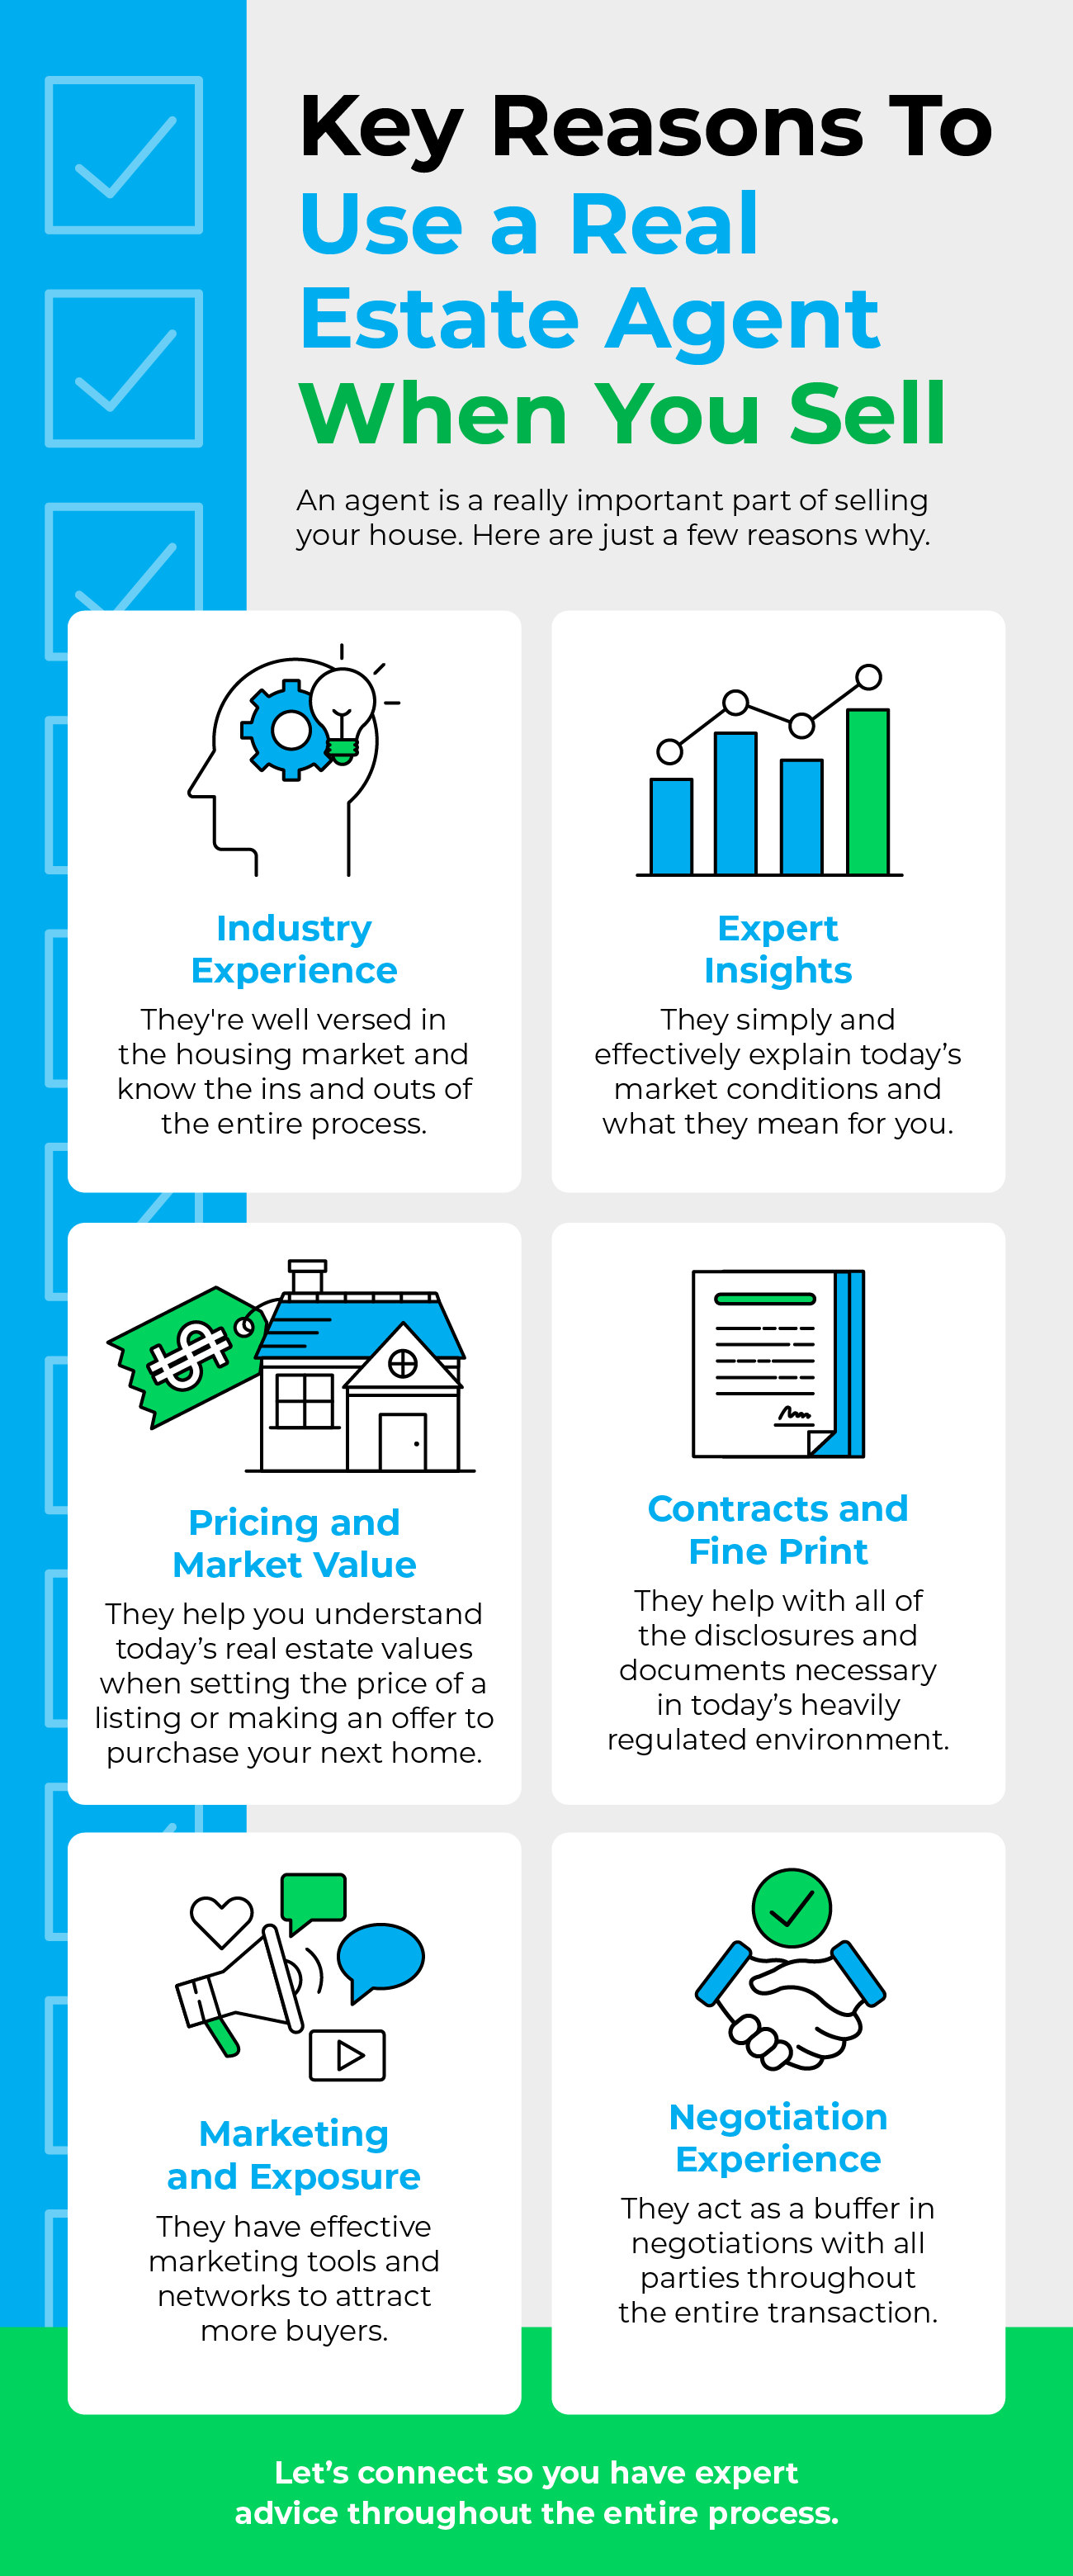 Key Reasons To Use a Real Estate Agent When You Sell - KM Realty Group LLC, Chicago